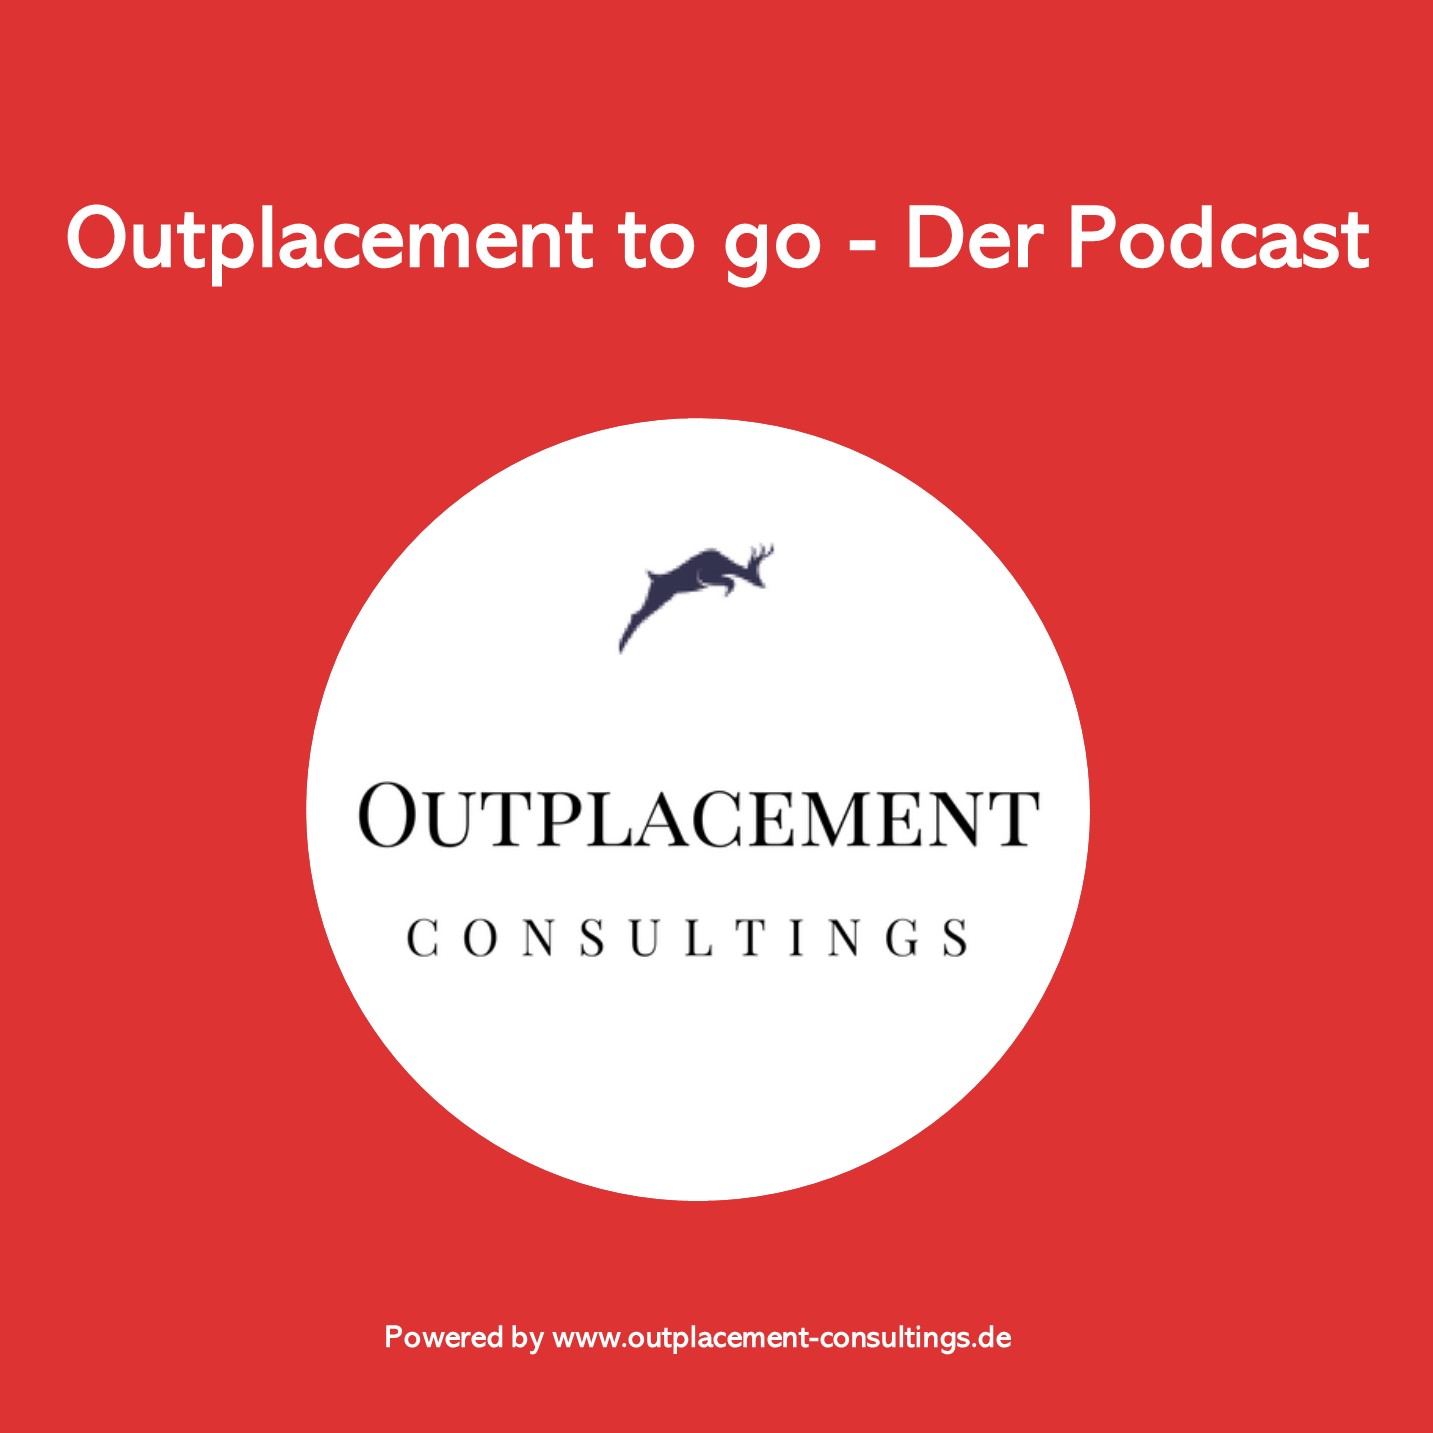 Outplacement to go - Der Podcast